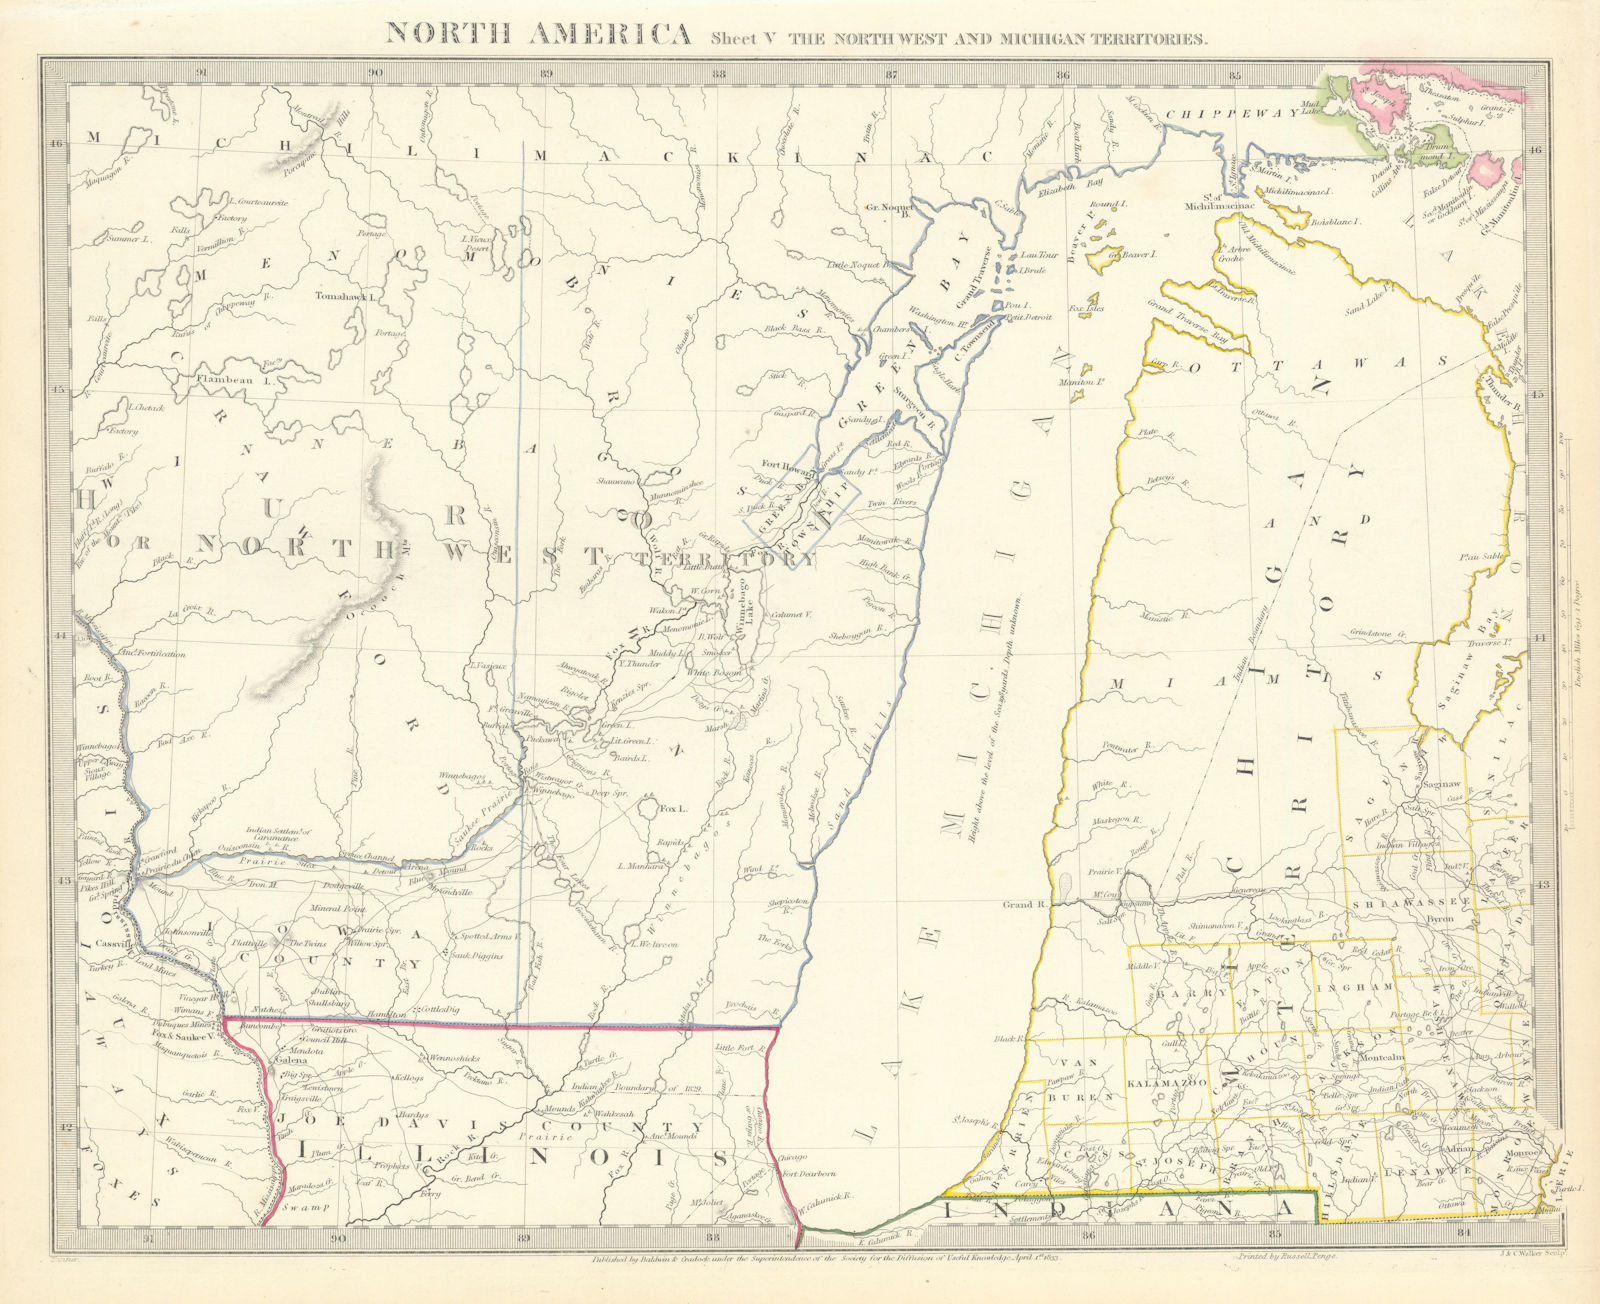 LAKE MICHIGAN.Wisconsin - NW Territory.Indian tribes villages. SDUK 1844 map